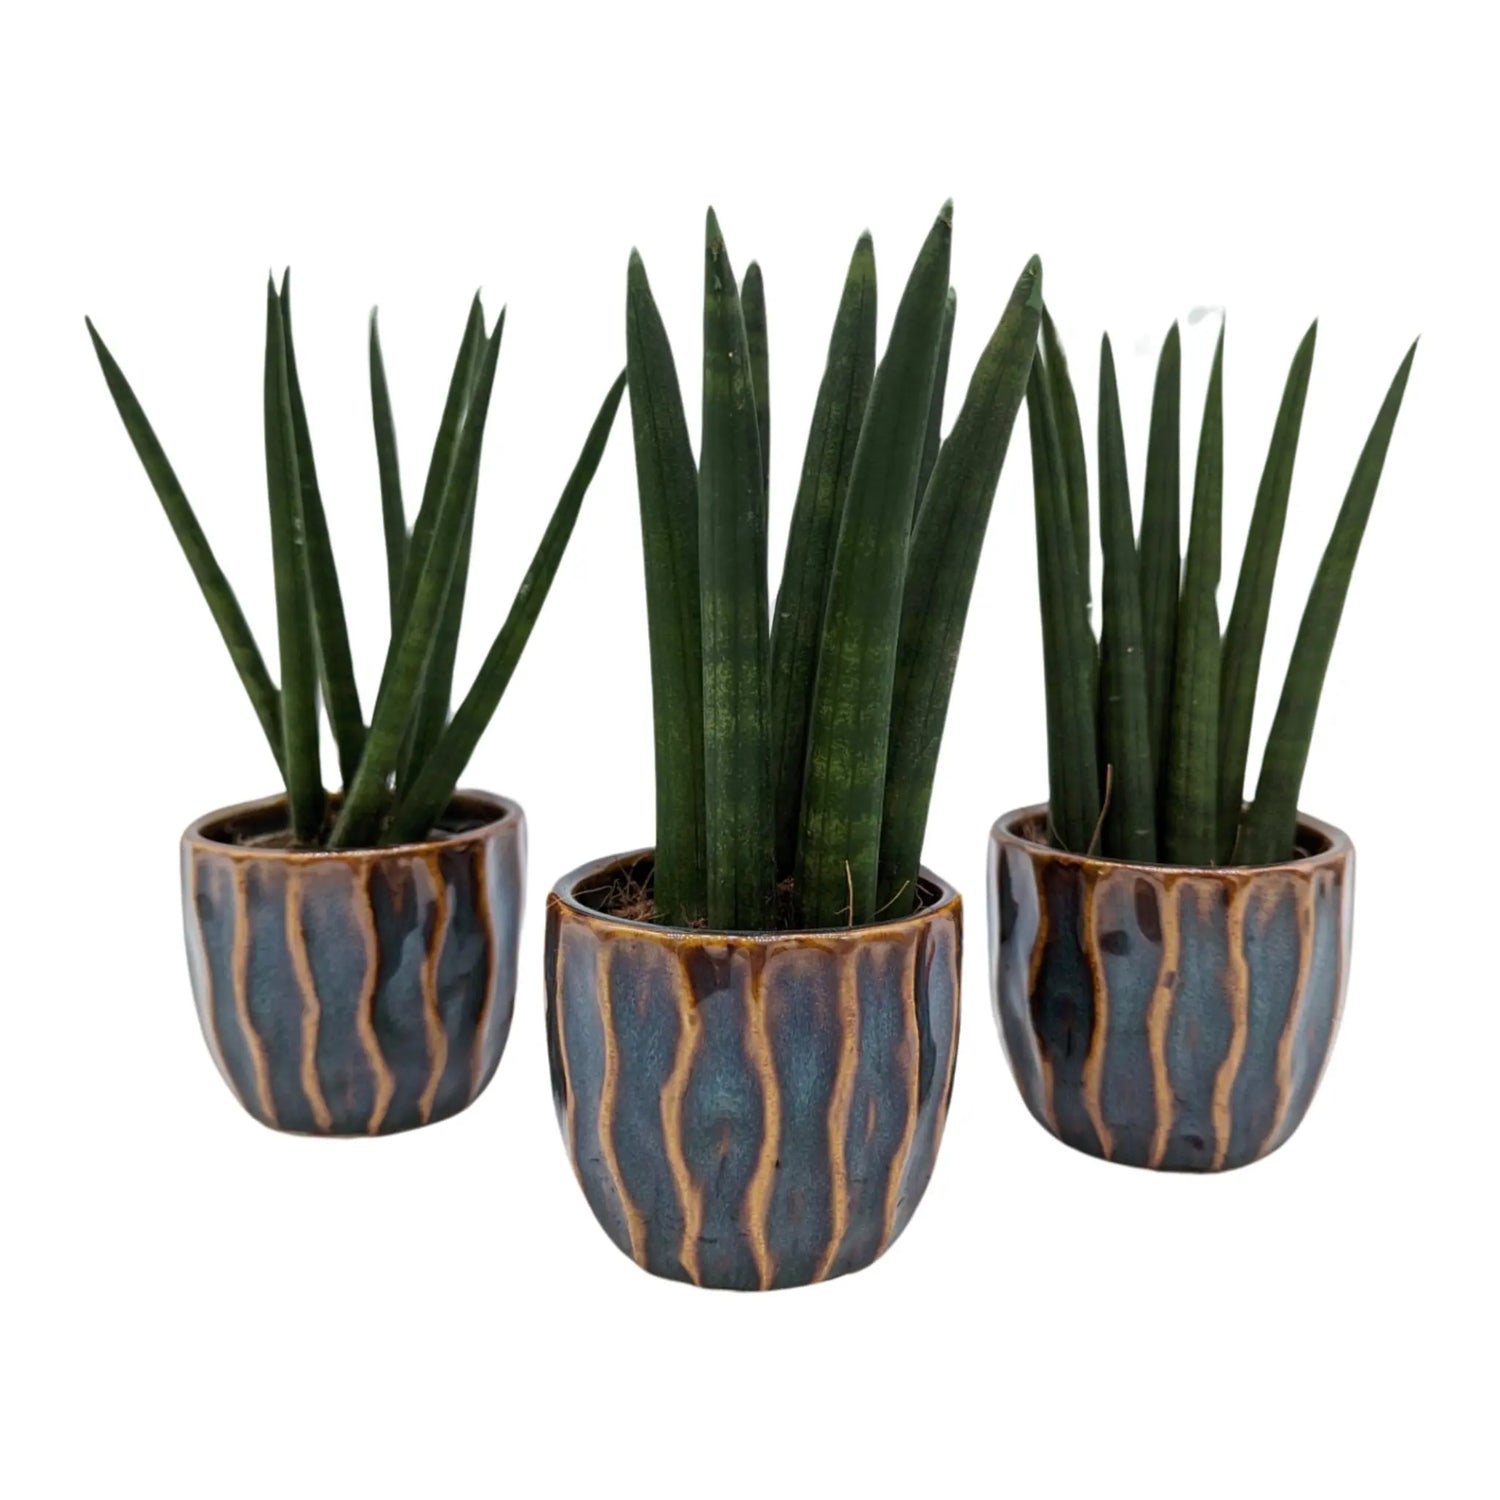 Sanseviera cylindrica in Decorative Pot - 18cm tall Leaf Culture